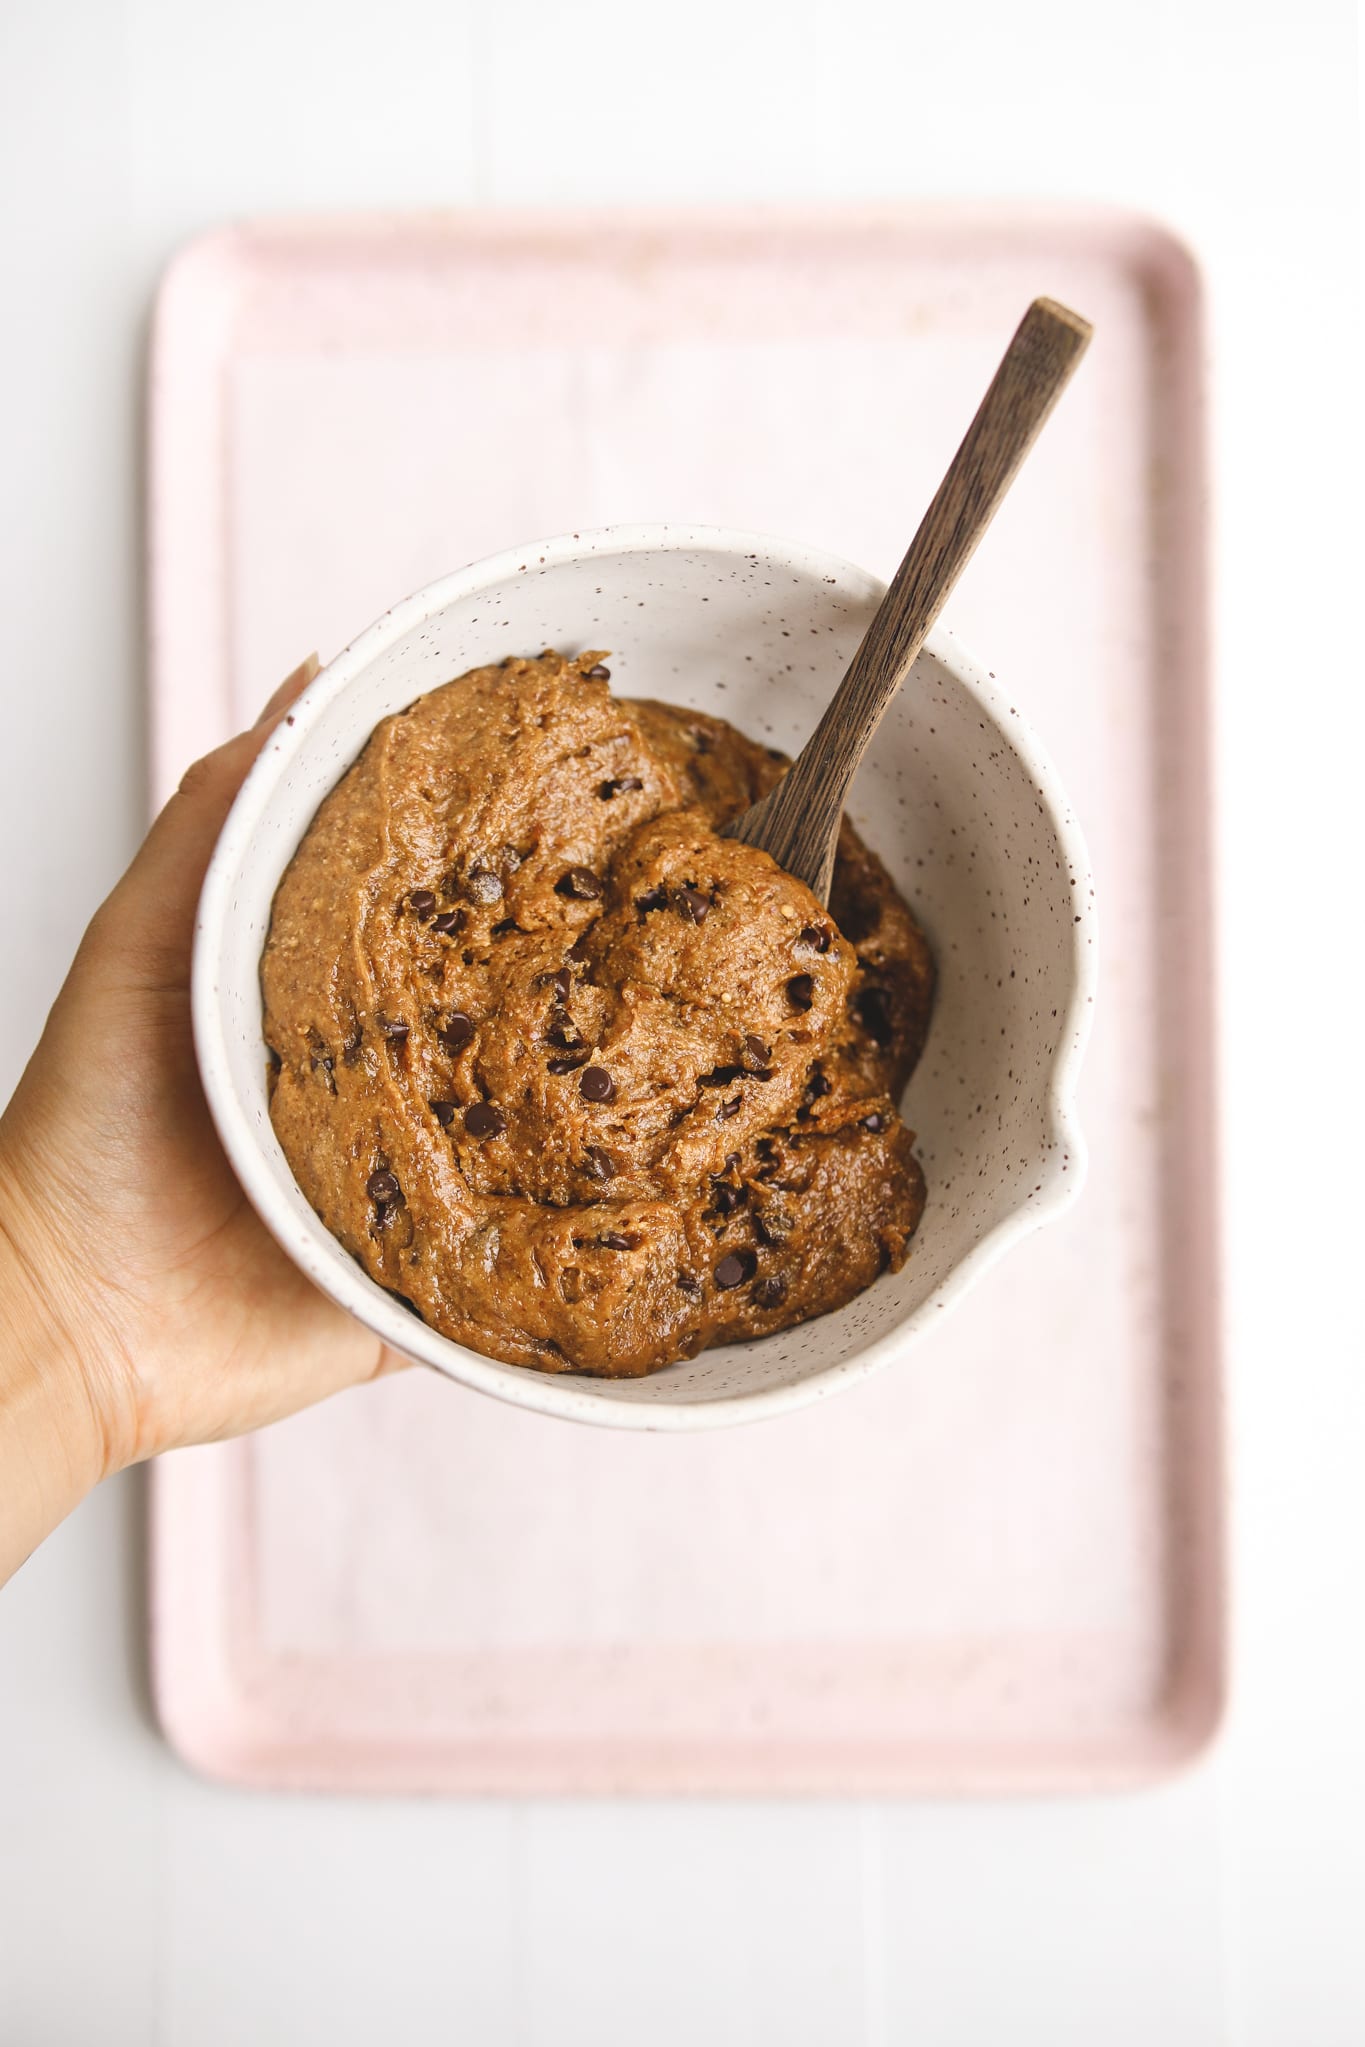 a hand holding a mixing bowl filled with vegan cookie dough and a wooden spoon.